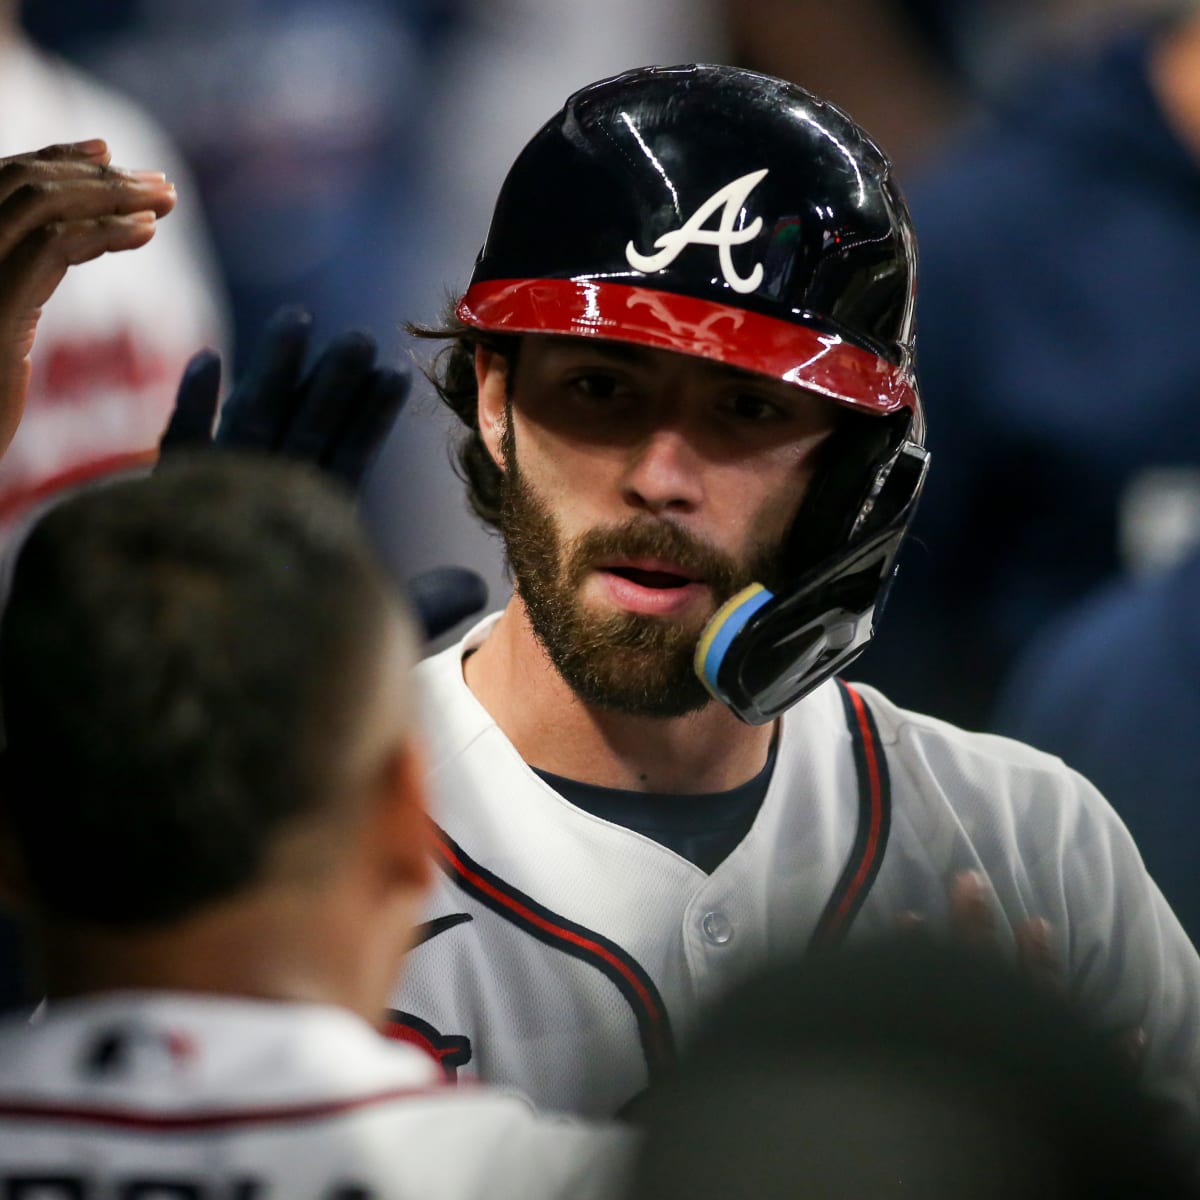 Dansby Swanson Stats: A look at the All-Star's 2022 season